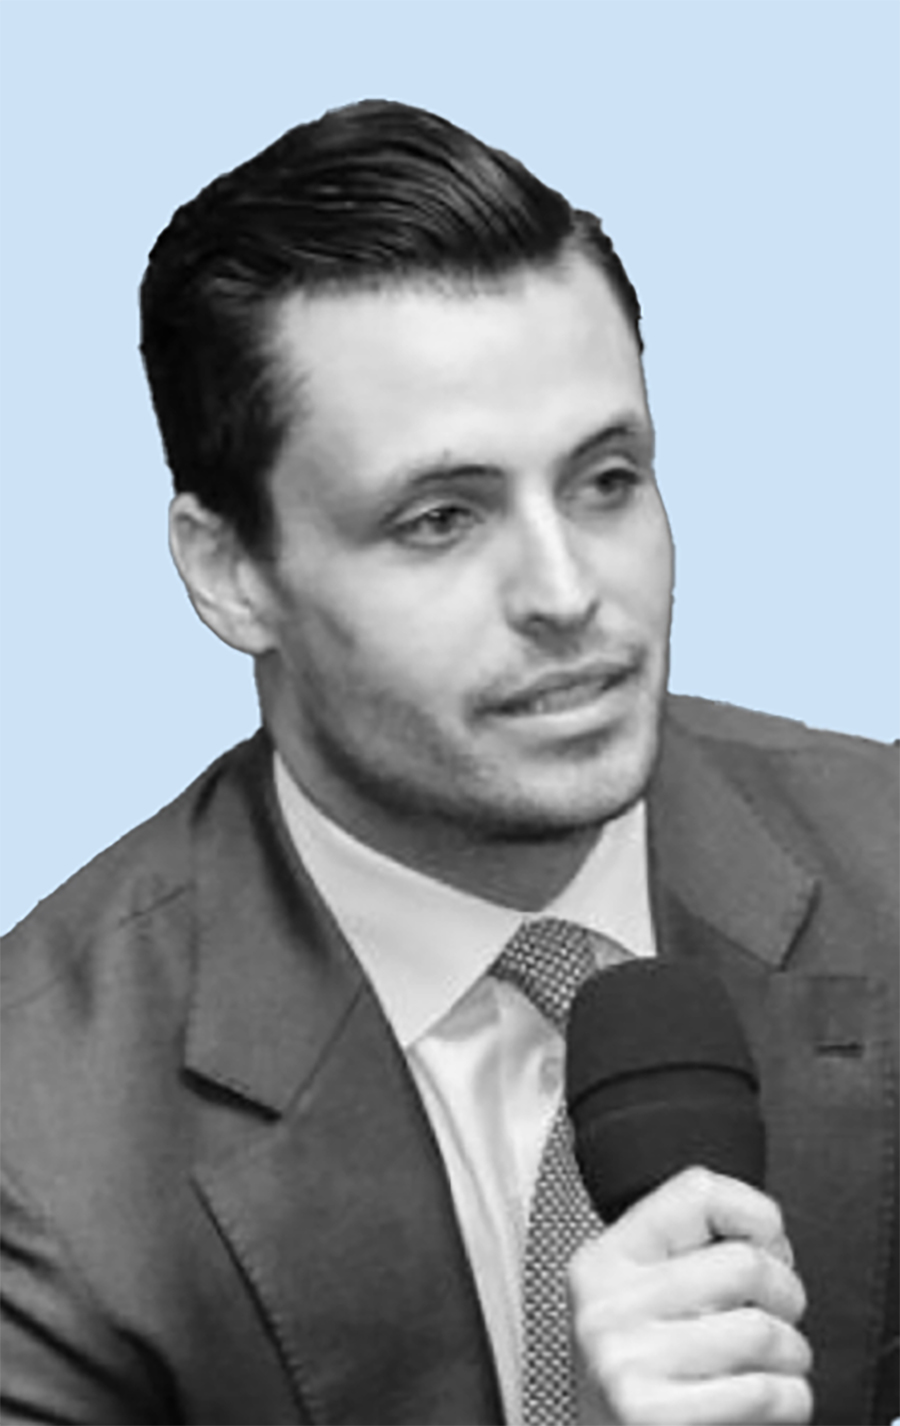 A black and white close-up portrait photograph perspective of Shaoul Sussman speaking while holding a microphone